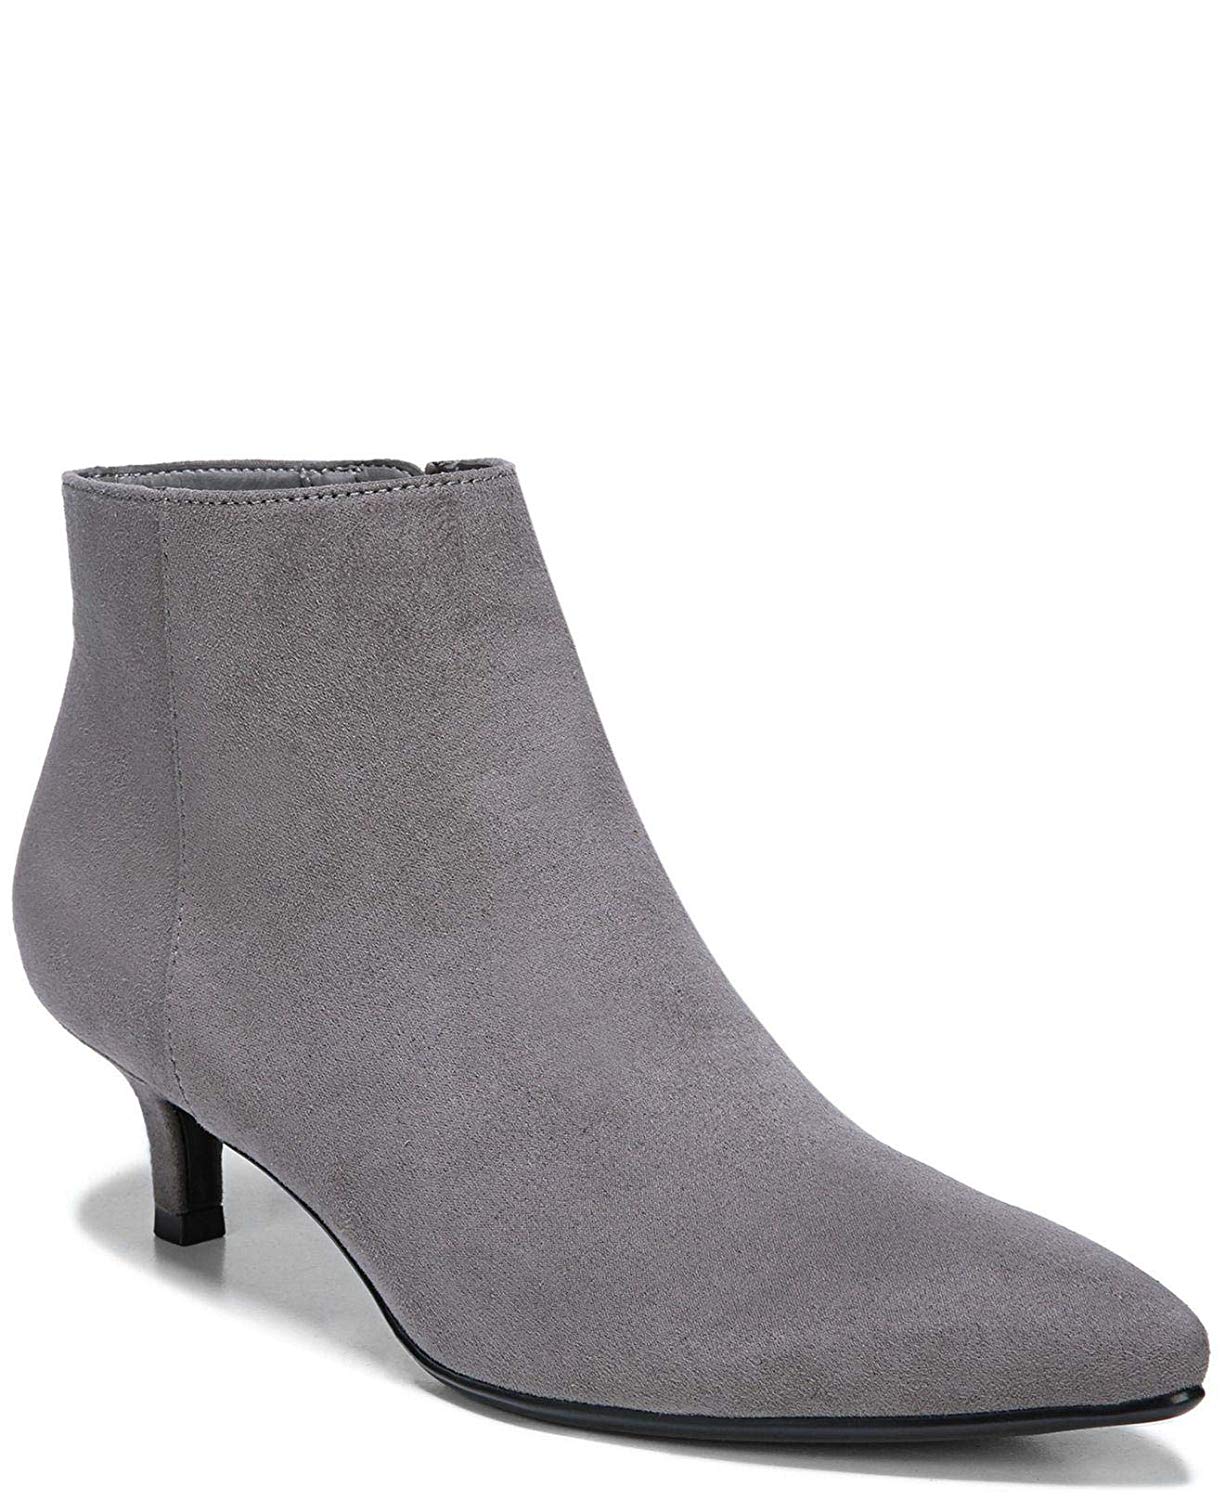 Naturalizer Womens Giselle Suede Pointed Toe Ankle Fashion Boots, Grey ...